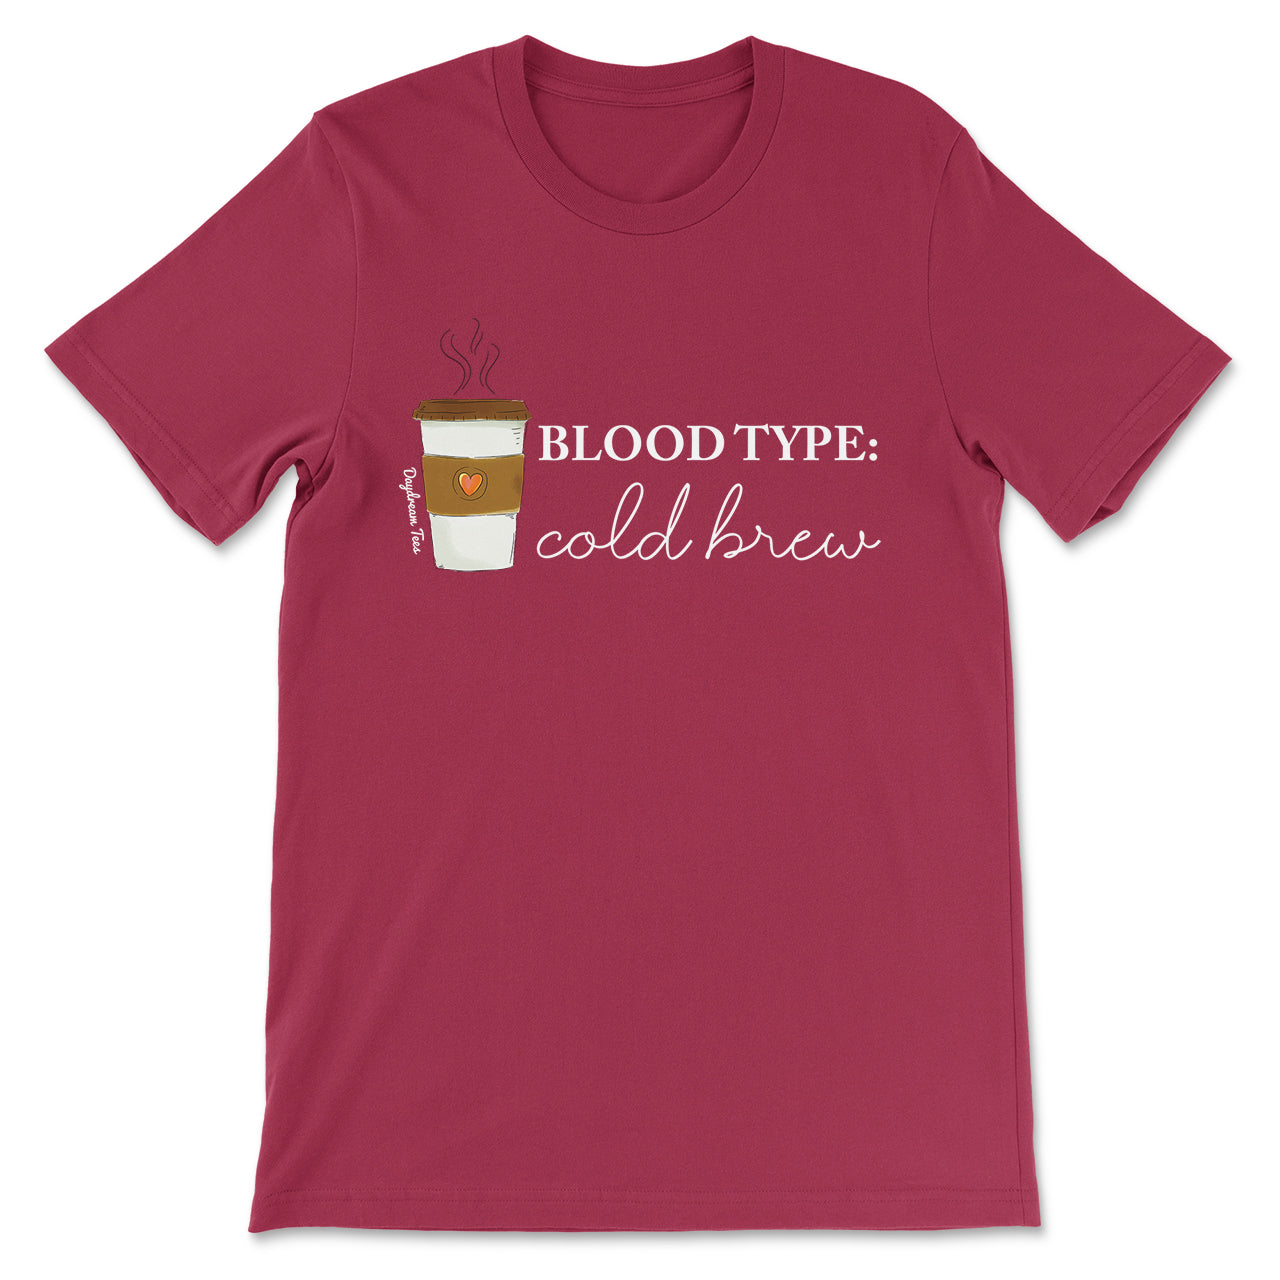 Daydream Tees Blood Type: Cold Brew Cardinal Red